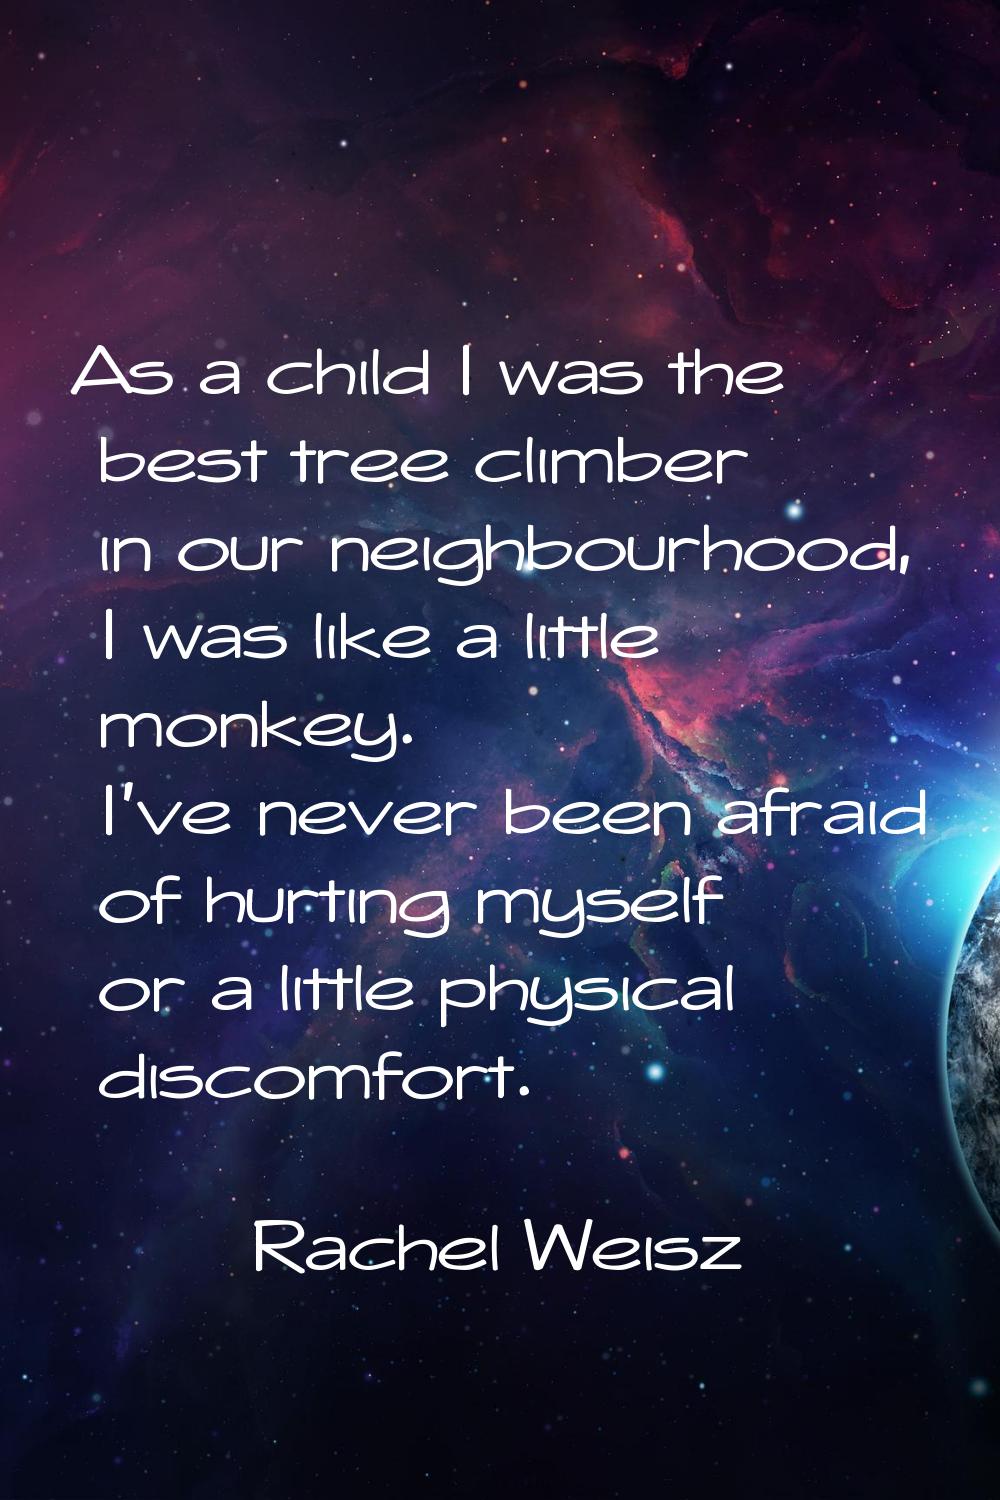 As a child I was the best tree climber in our neighbourhood, I was like a little monkey. I've never